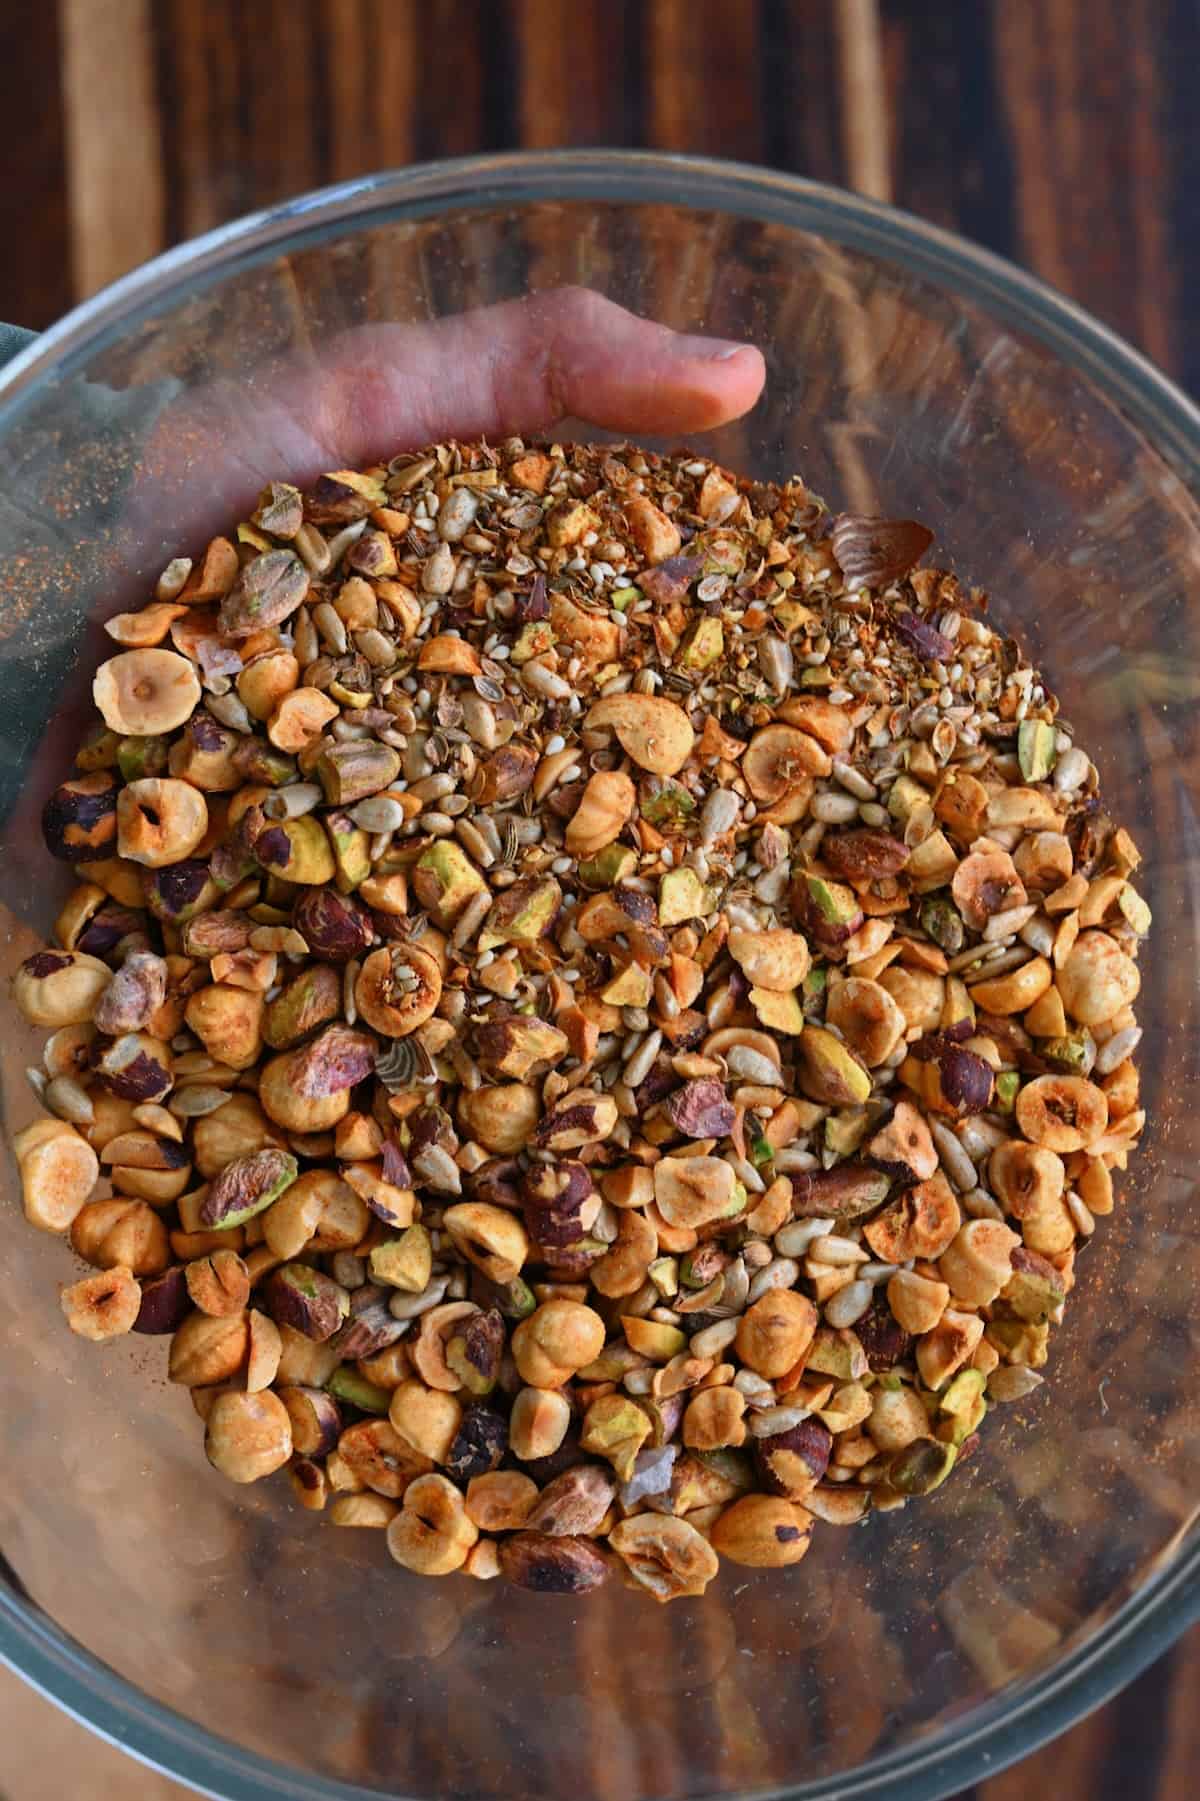 Skab skuespillerinde Mexico How to Make Dukkah (Egyptian Spice Blend) - Alphafoodie